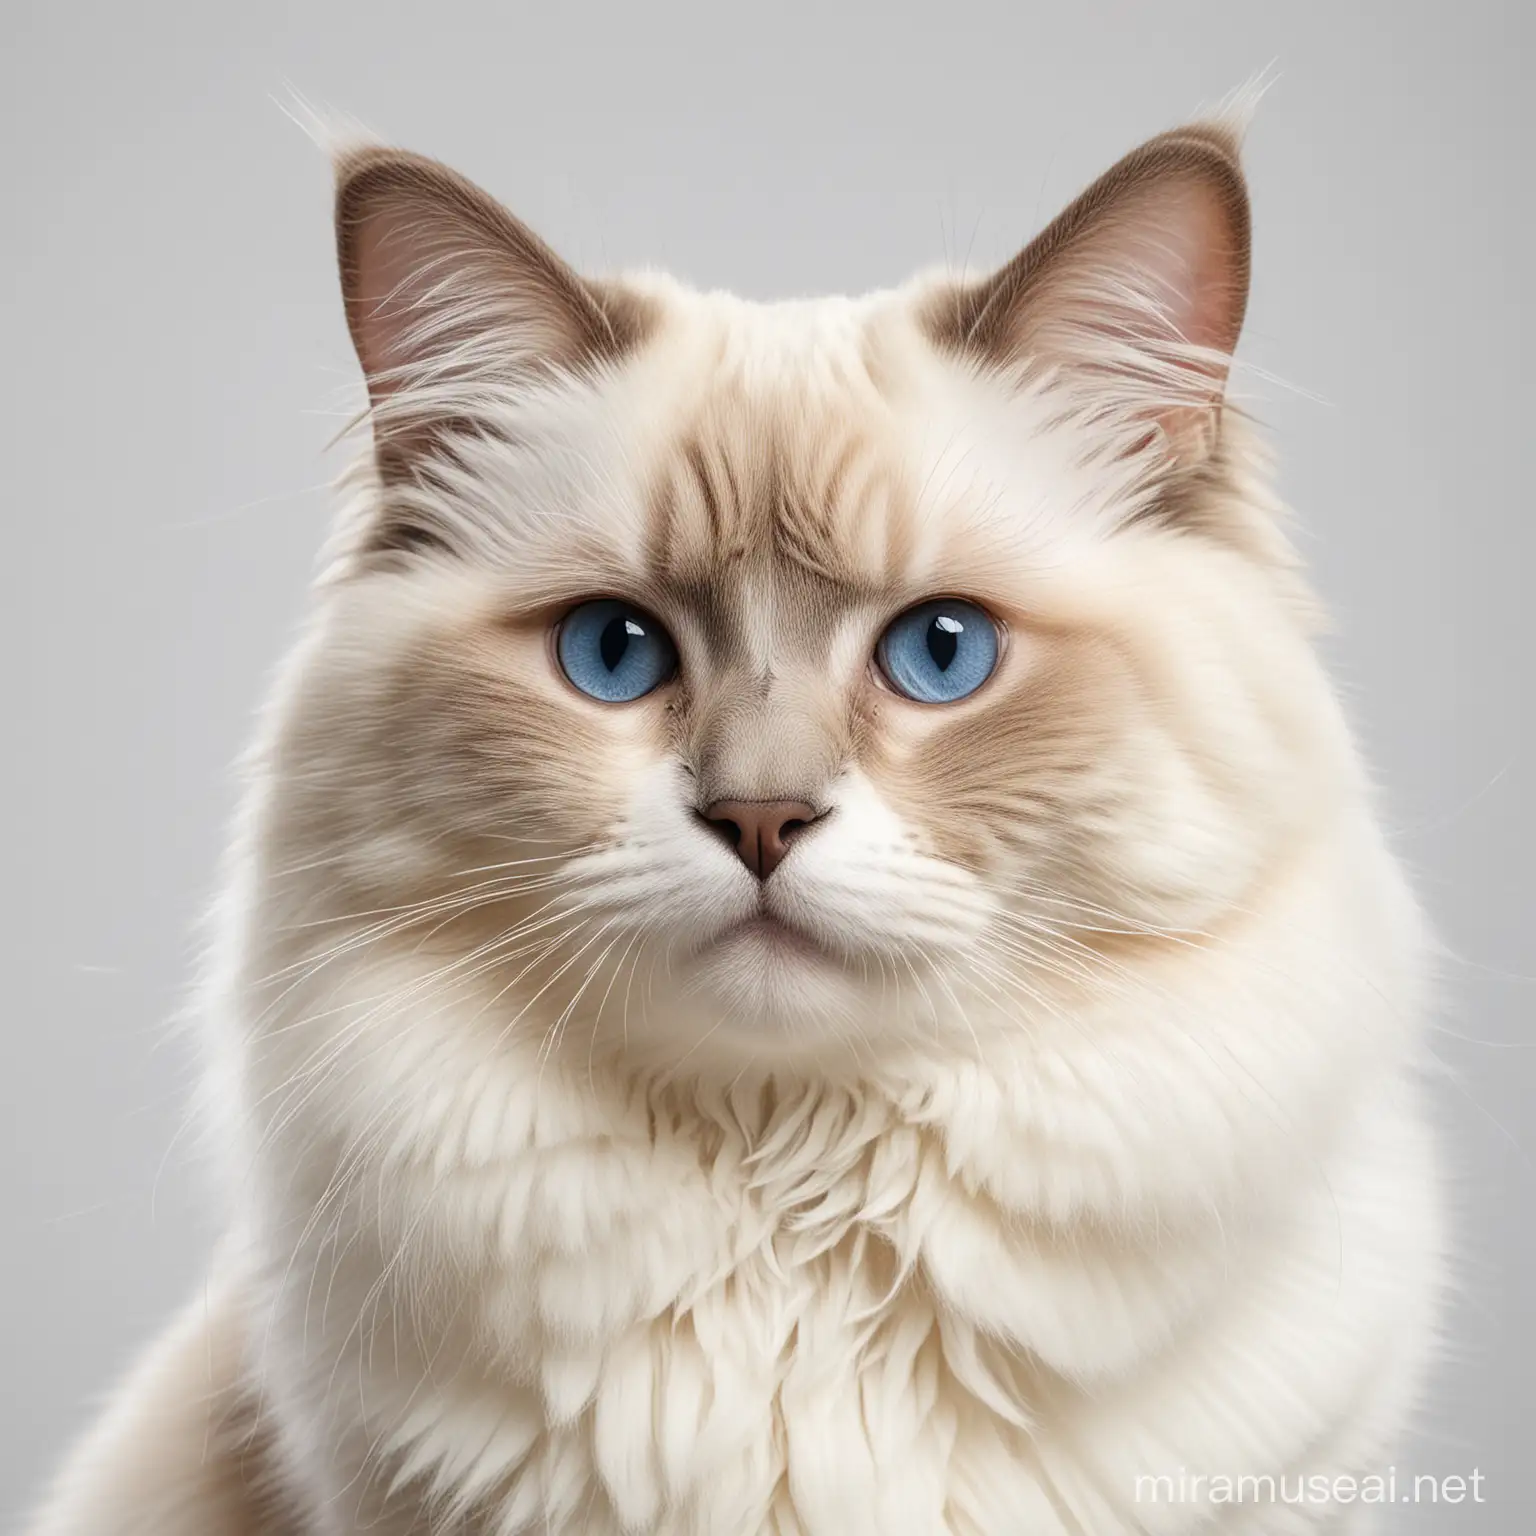 Studio Quality Ragdoll Cat with Exquisite Details on White Background